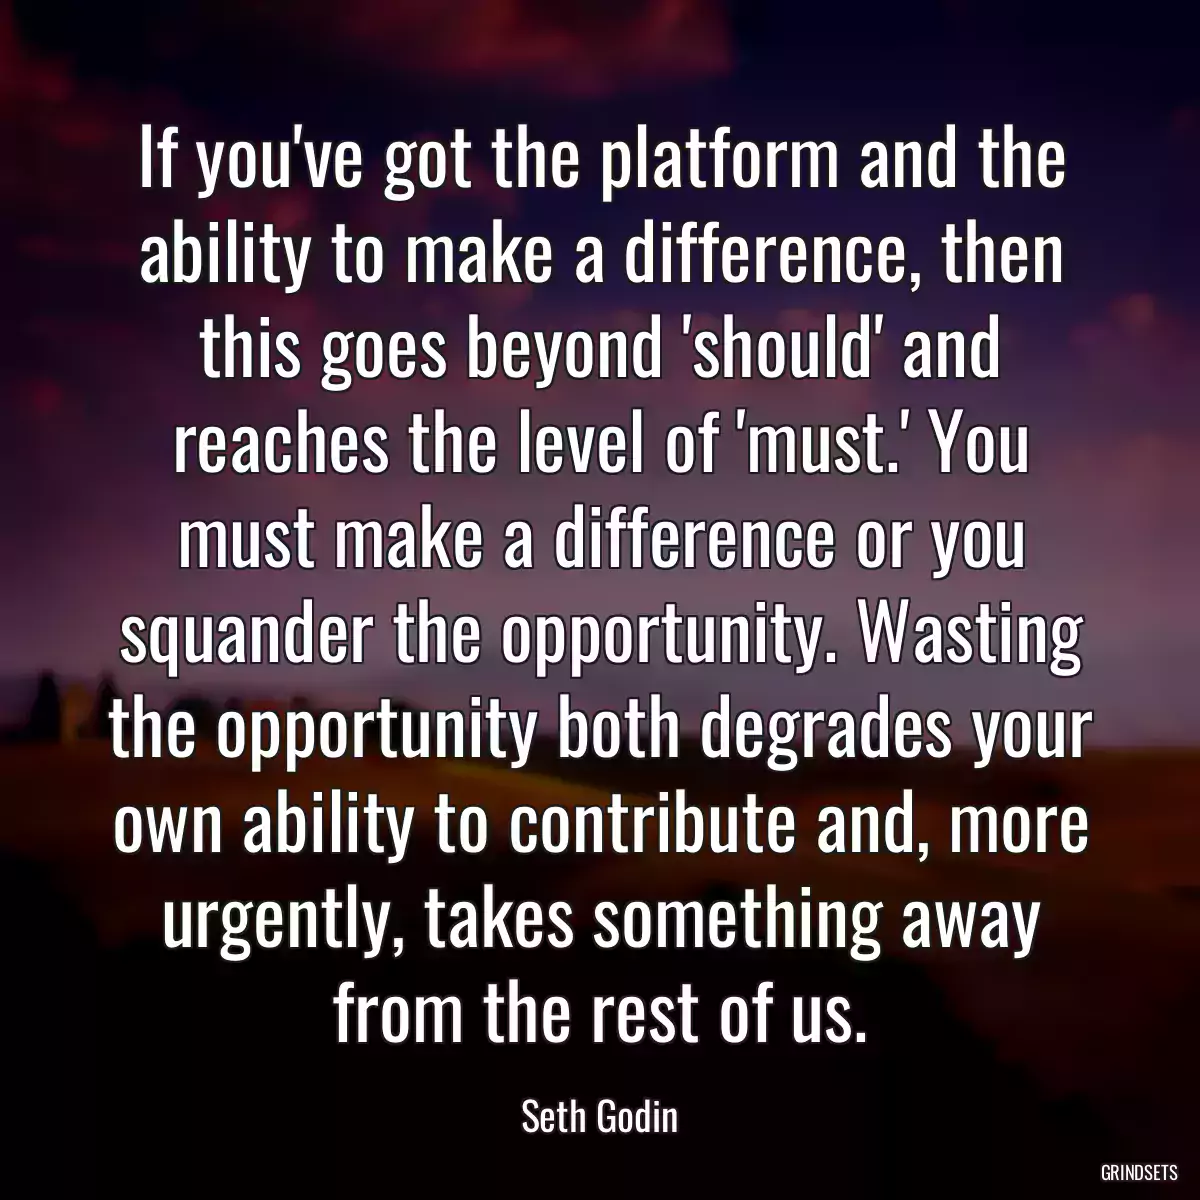 If you\'ve got the platform and the ability to make a difference, then this goes beyond \'should\' and reaches the level of \'must.\' You must make a difference or you squander the opportunity. Wasting the opportunity both degrades your own ability to contribute and, more urgently, takes something away from the rest of us.